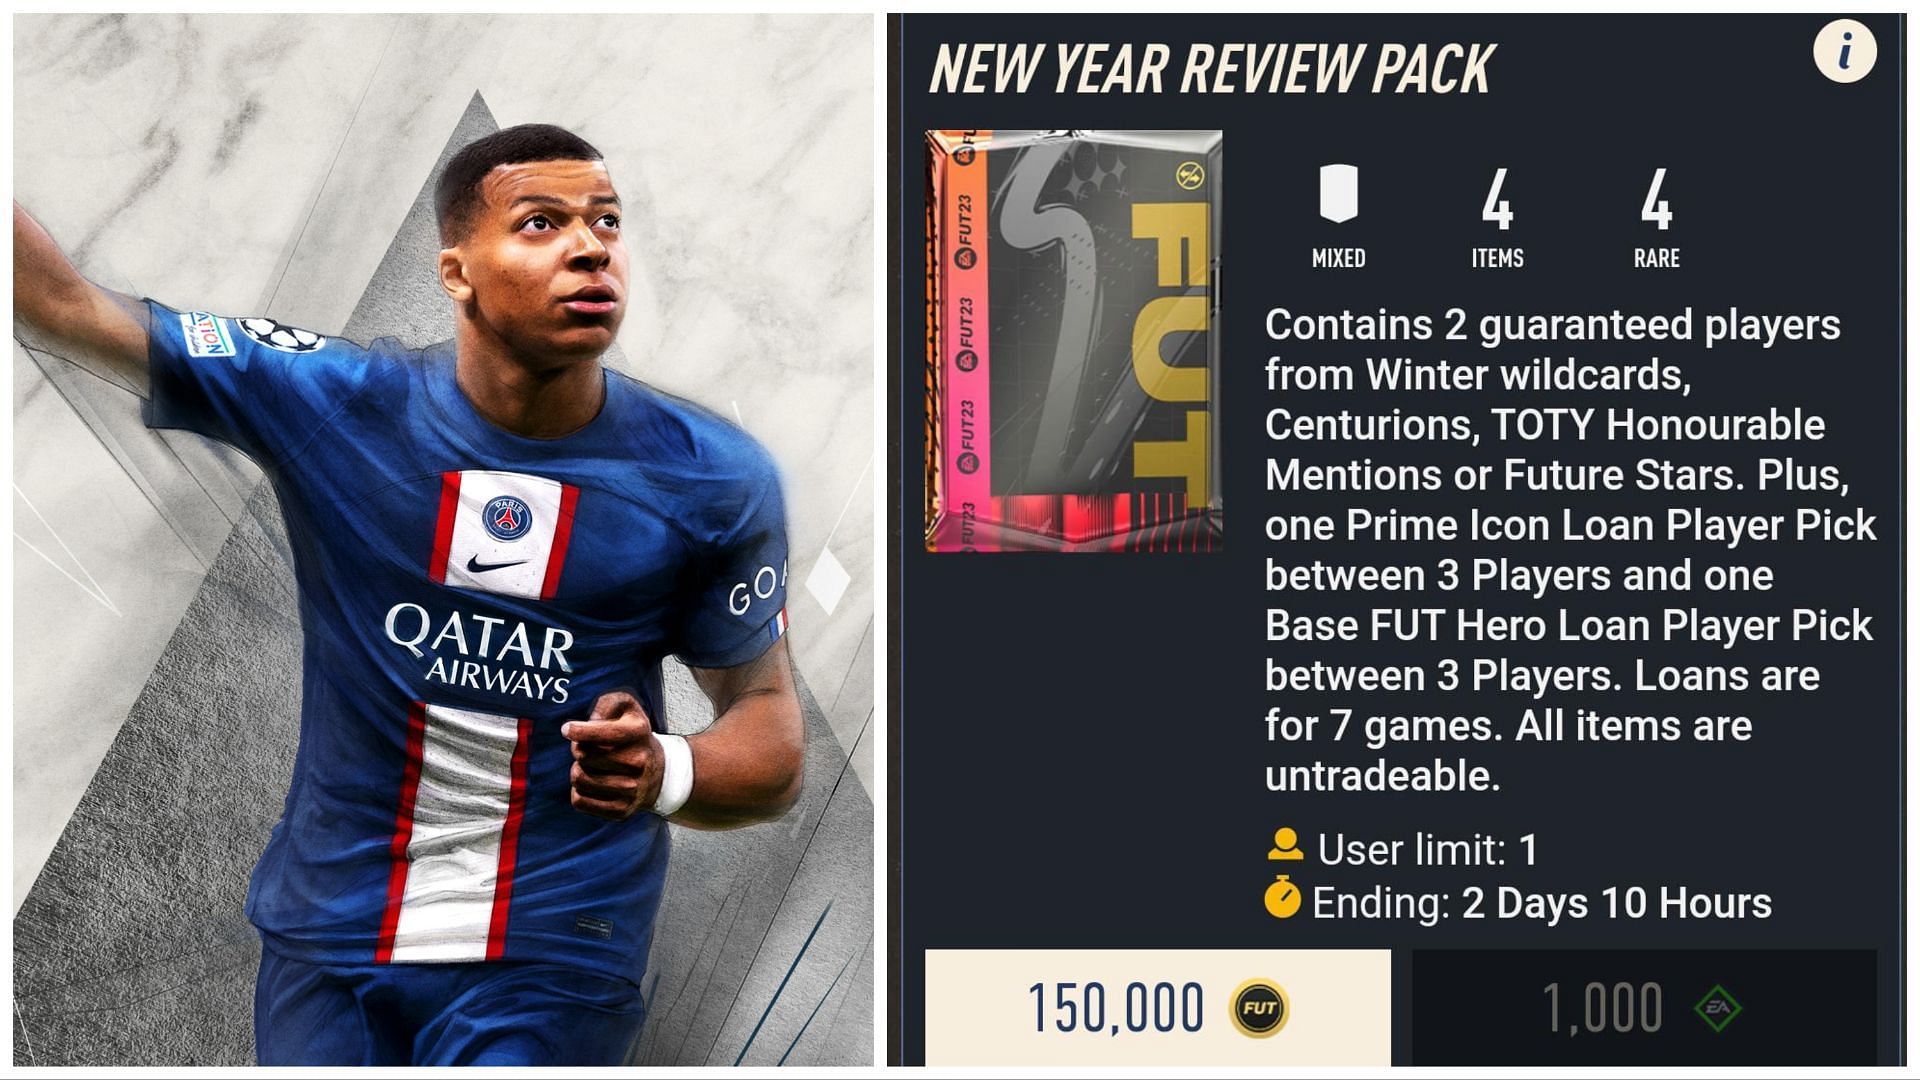 The New Year Review Pack is now available (Images via EA Sports)